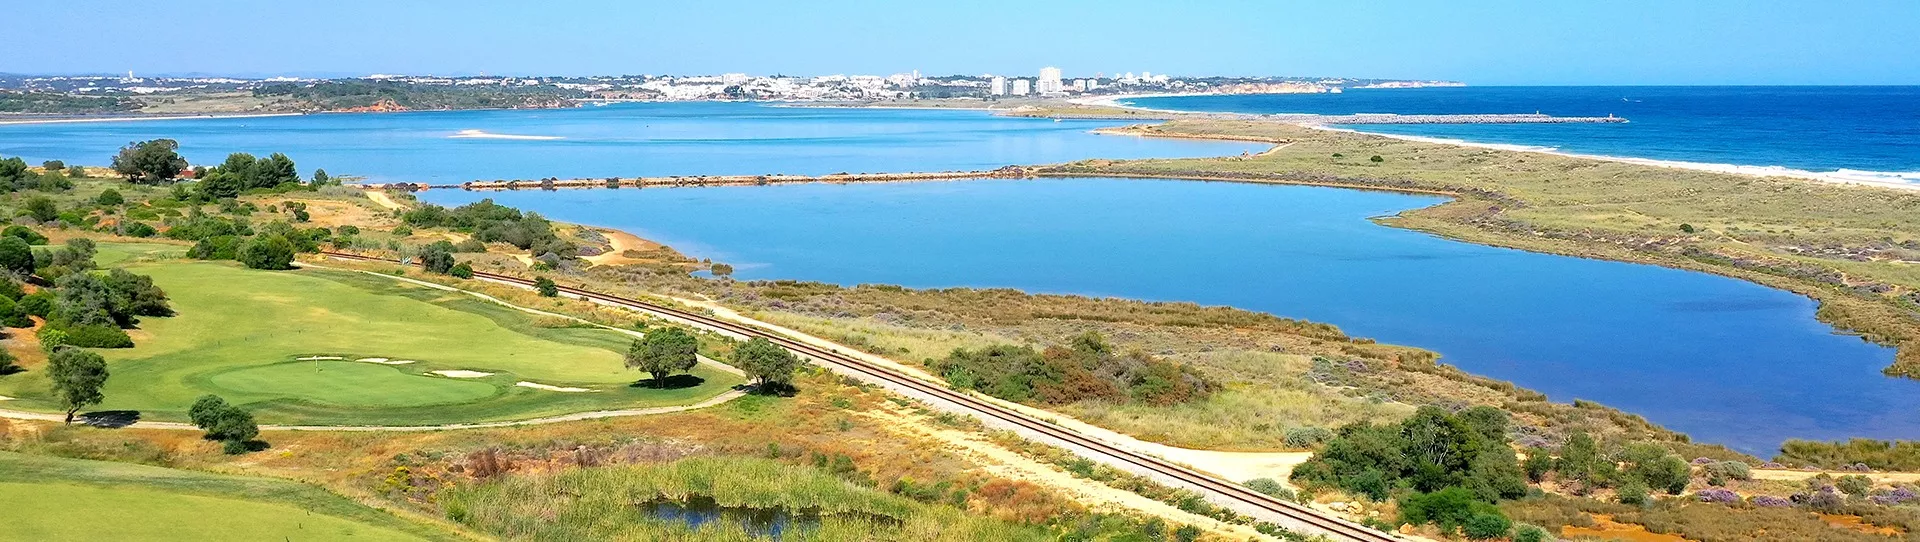 Portugal golf holidays - Palmares Quintuplet Experience - Photo 1